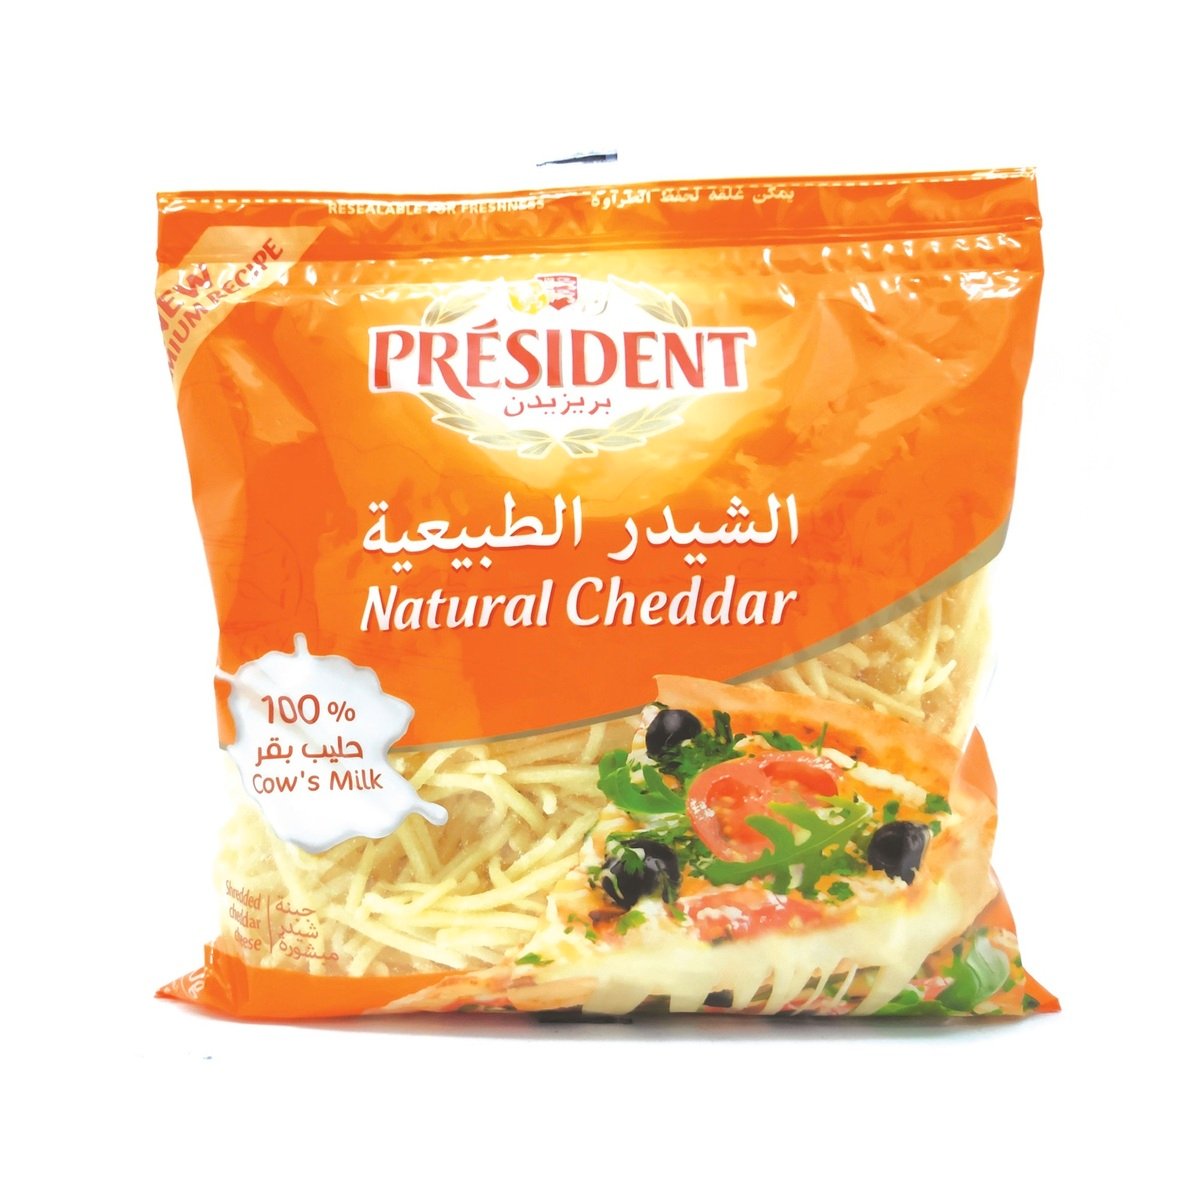 President Natural Cheddar Cheese 450 g